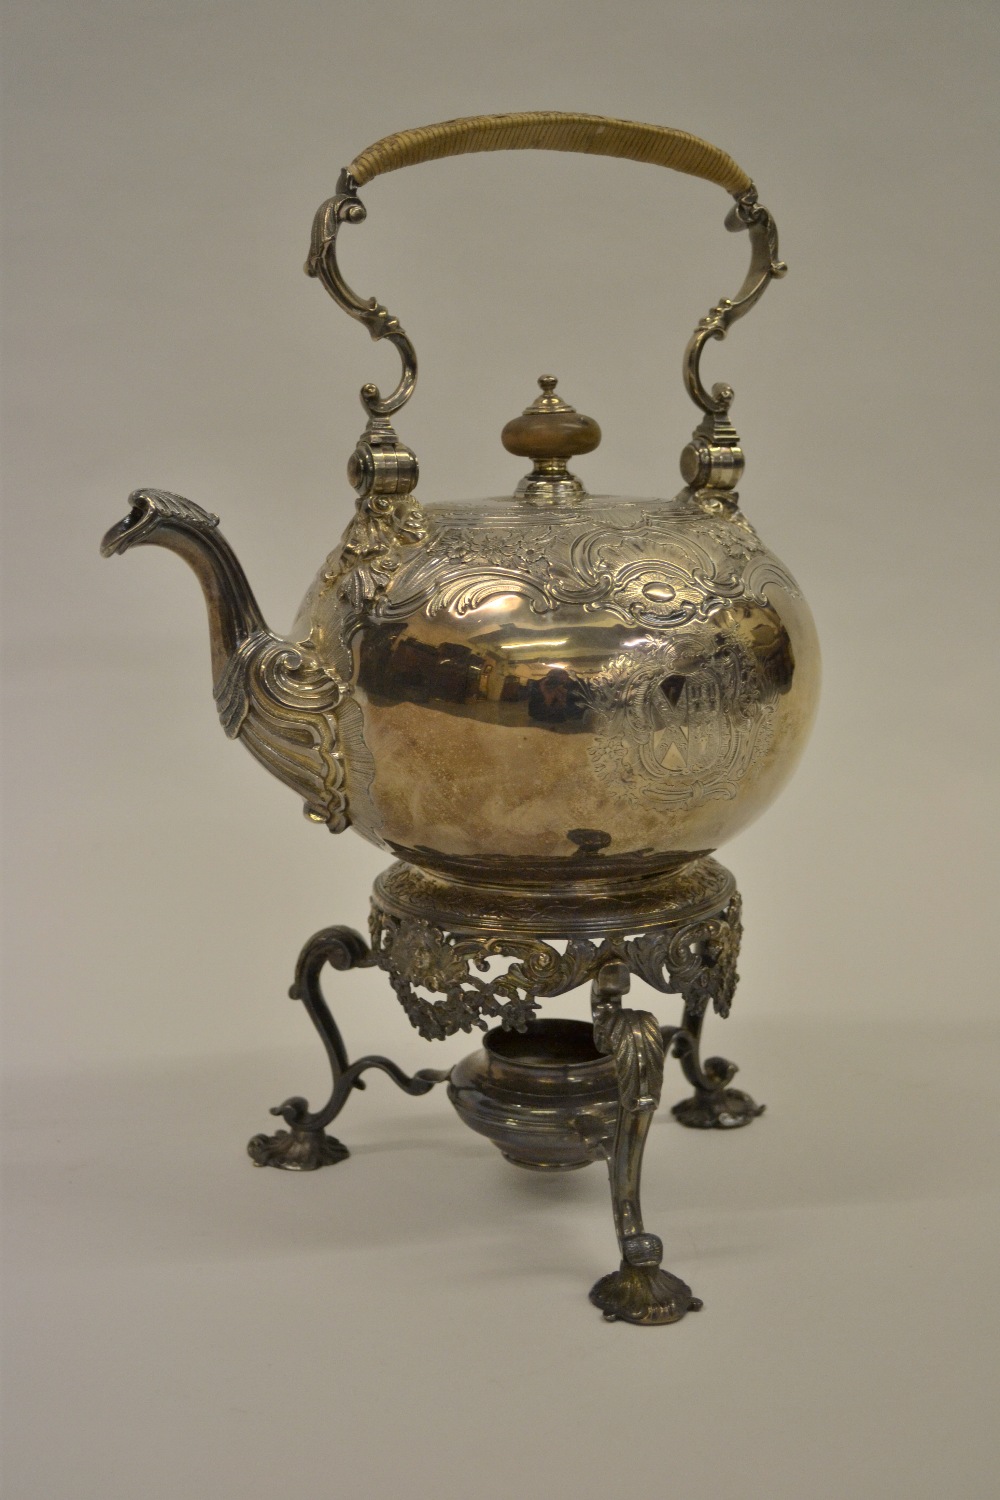 George II silver spirit kettle on stand with embossed and engraved floral and C-scroll decoration